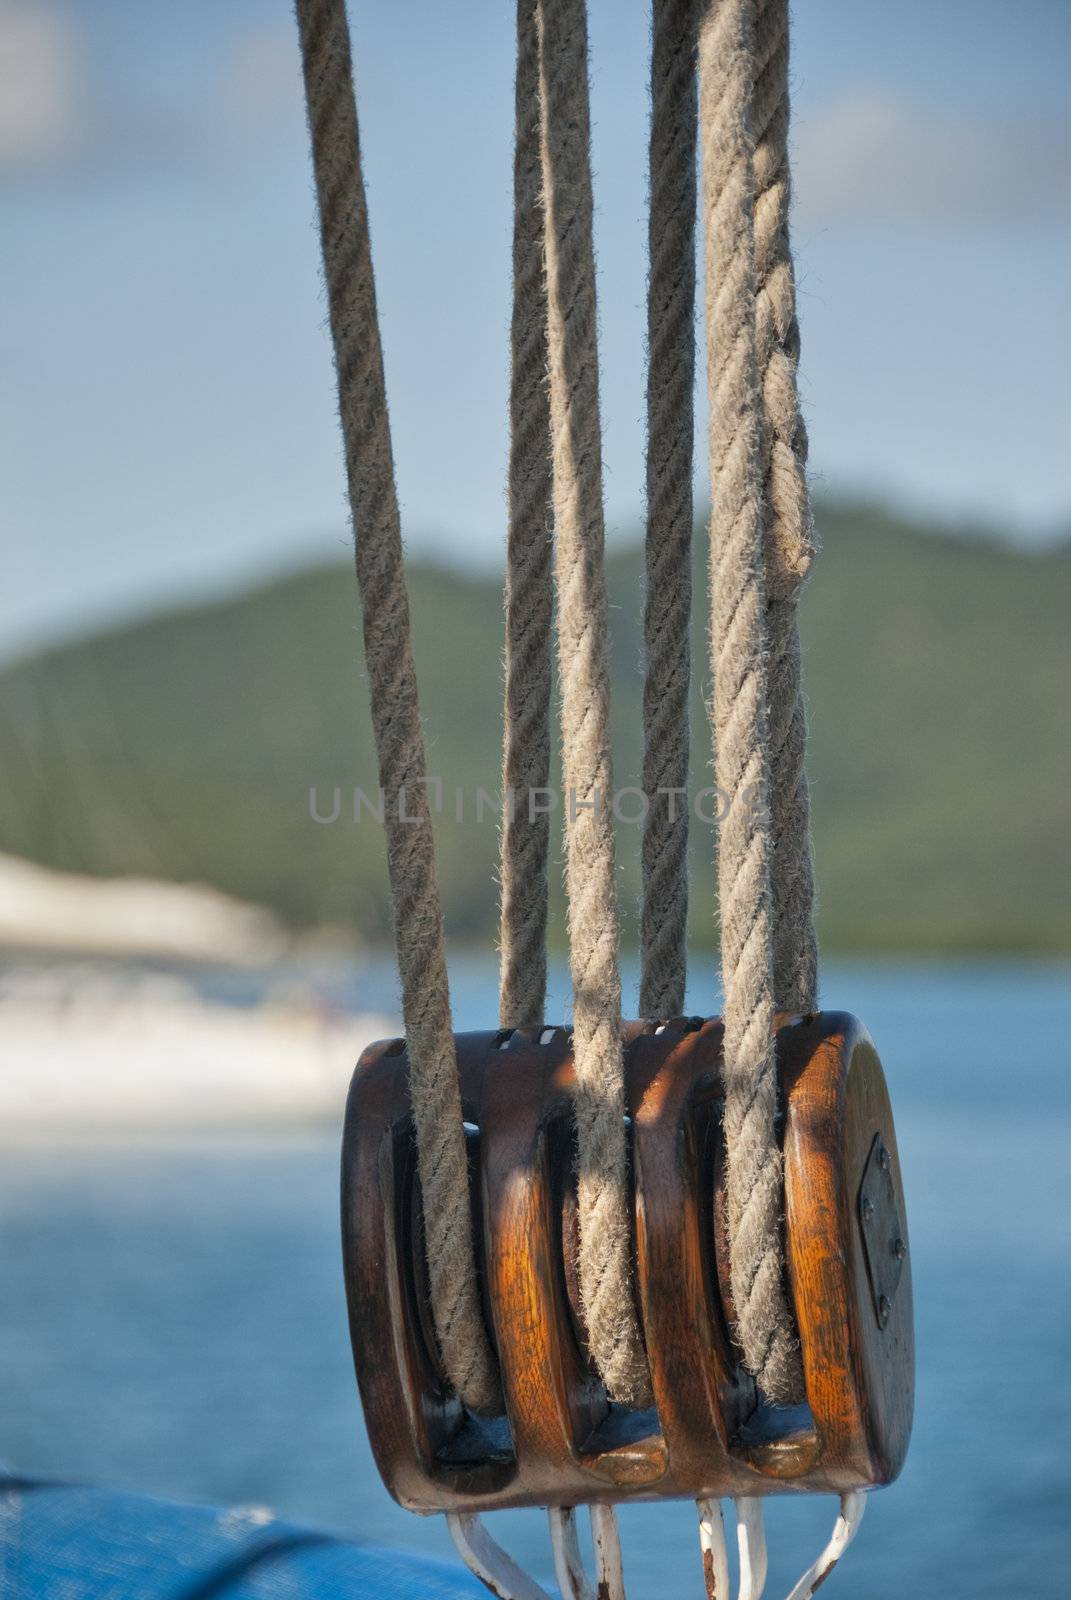 Ropes and Pulley, Whitsunday Islands, Queensland, Australia, Aug by jovannig